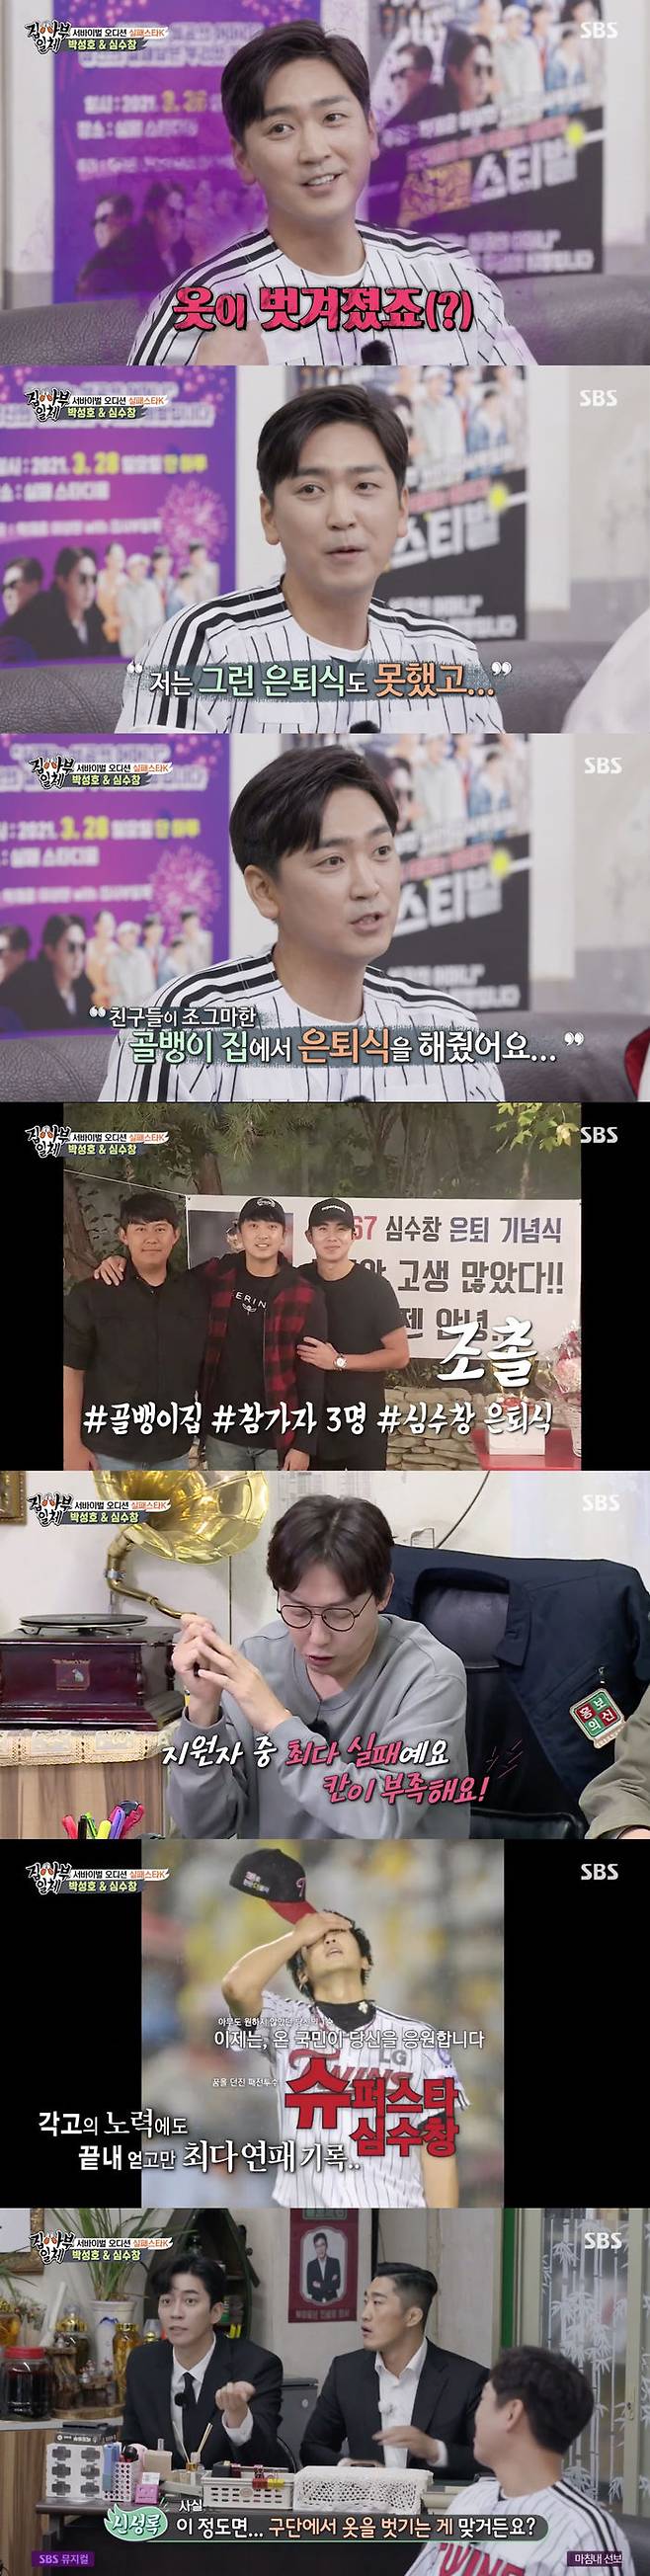 Shim Soo-chang reveals record of fiascoOn SBS All The Butlers broadcasted on the 21st, Failure Star K was held to select those who will be in the failed festival.On this day, the members and masters were puzzled by the appearance of former professional baseball player Shim Soo-chang.Tak Jae-hun said, It was a success to be a baseball player and did not you retire it. What did you fail?Shim Soo-chang said, I did not do retirement, Clothing was stripped, I did not retire myself, I was cut.And others have a great retrement ceremony, and I have not been able to retrement. If it is a failure, it is a failure.My friends gave me a retirement ceremony at a small house, and I made it small by four people. At this time, Lee Seung-gi was the first to release his record of failure, saying, When I look at the resume, it is the most failure of the applicants.Kim Dong-Hyun asked, How much is the period?Shim Soo-chang said, Its about three years, and Kim Dong-Hyun was surprised to say, Did you lose all three years?Then Shin Sung-rok said, In fact, it is right to take Clothing off the club. Tak Jae-hun asked, Do you think you have taken Clothing off?Shim Soo-chang smiled a nice smile, saying, There is nothing to say.After that, Shim Soo-chang surprised everyone by releasing the record of failure of the past.